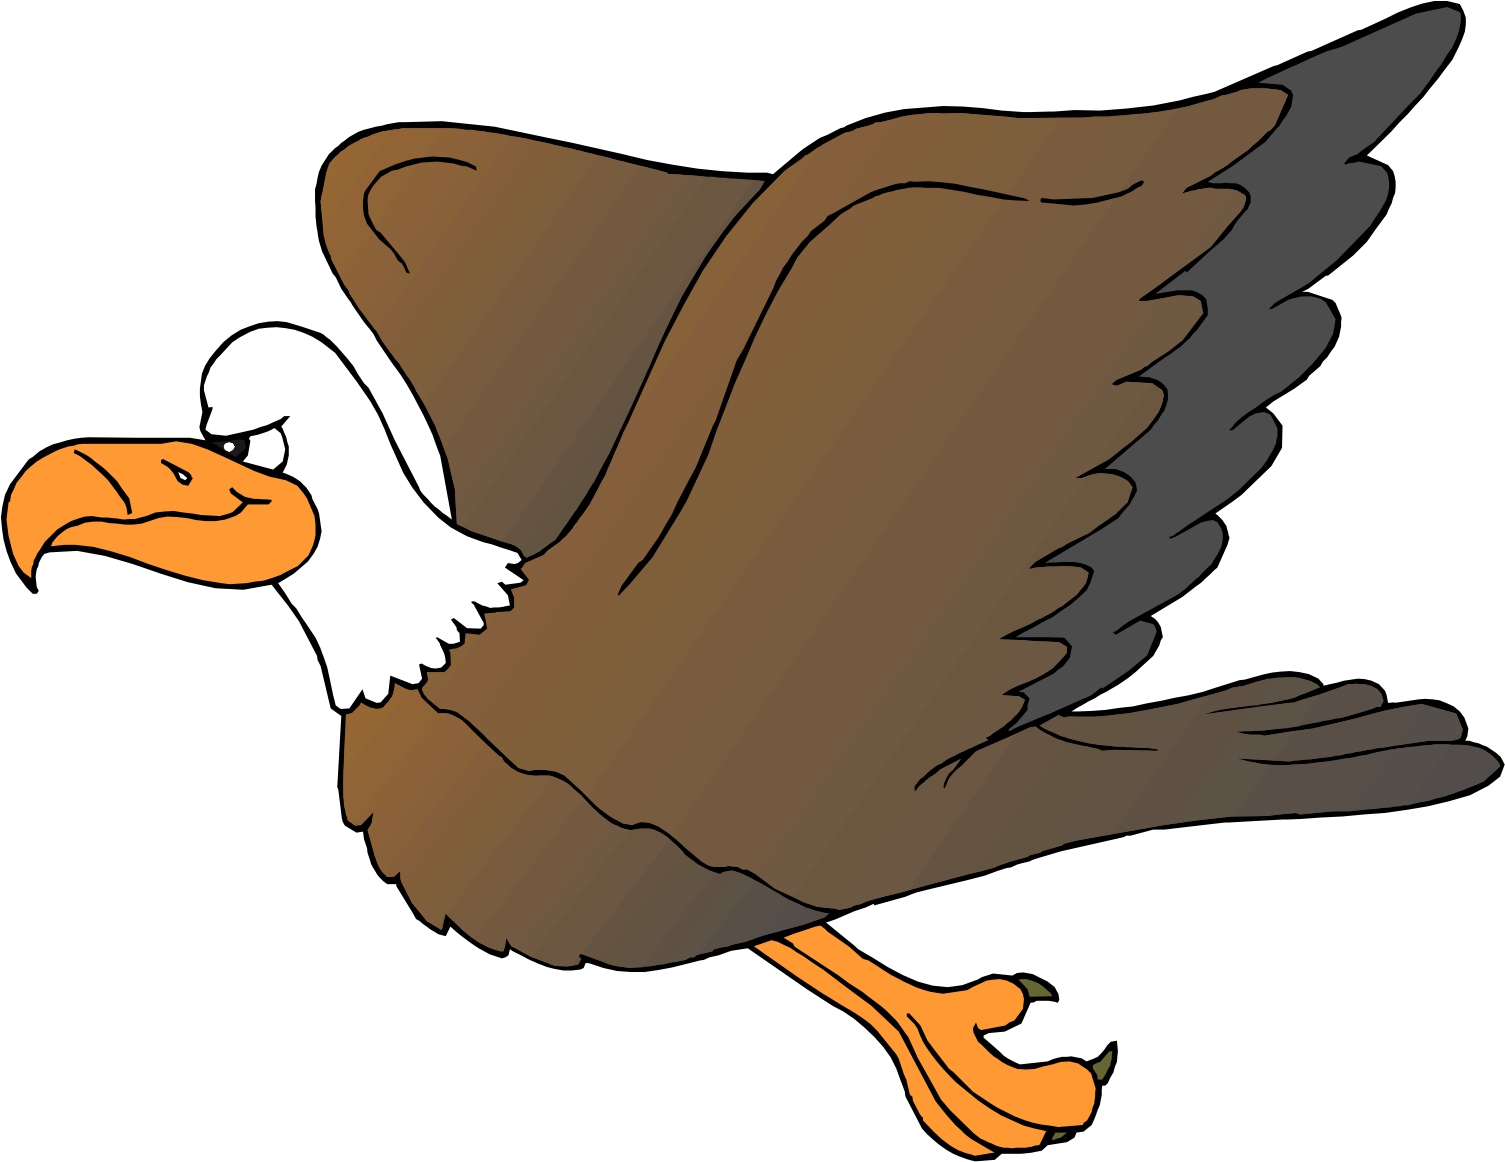 12 Pictures Of Cartoon Eagles Free Cliparts That You Can Download To